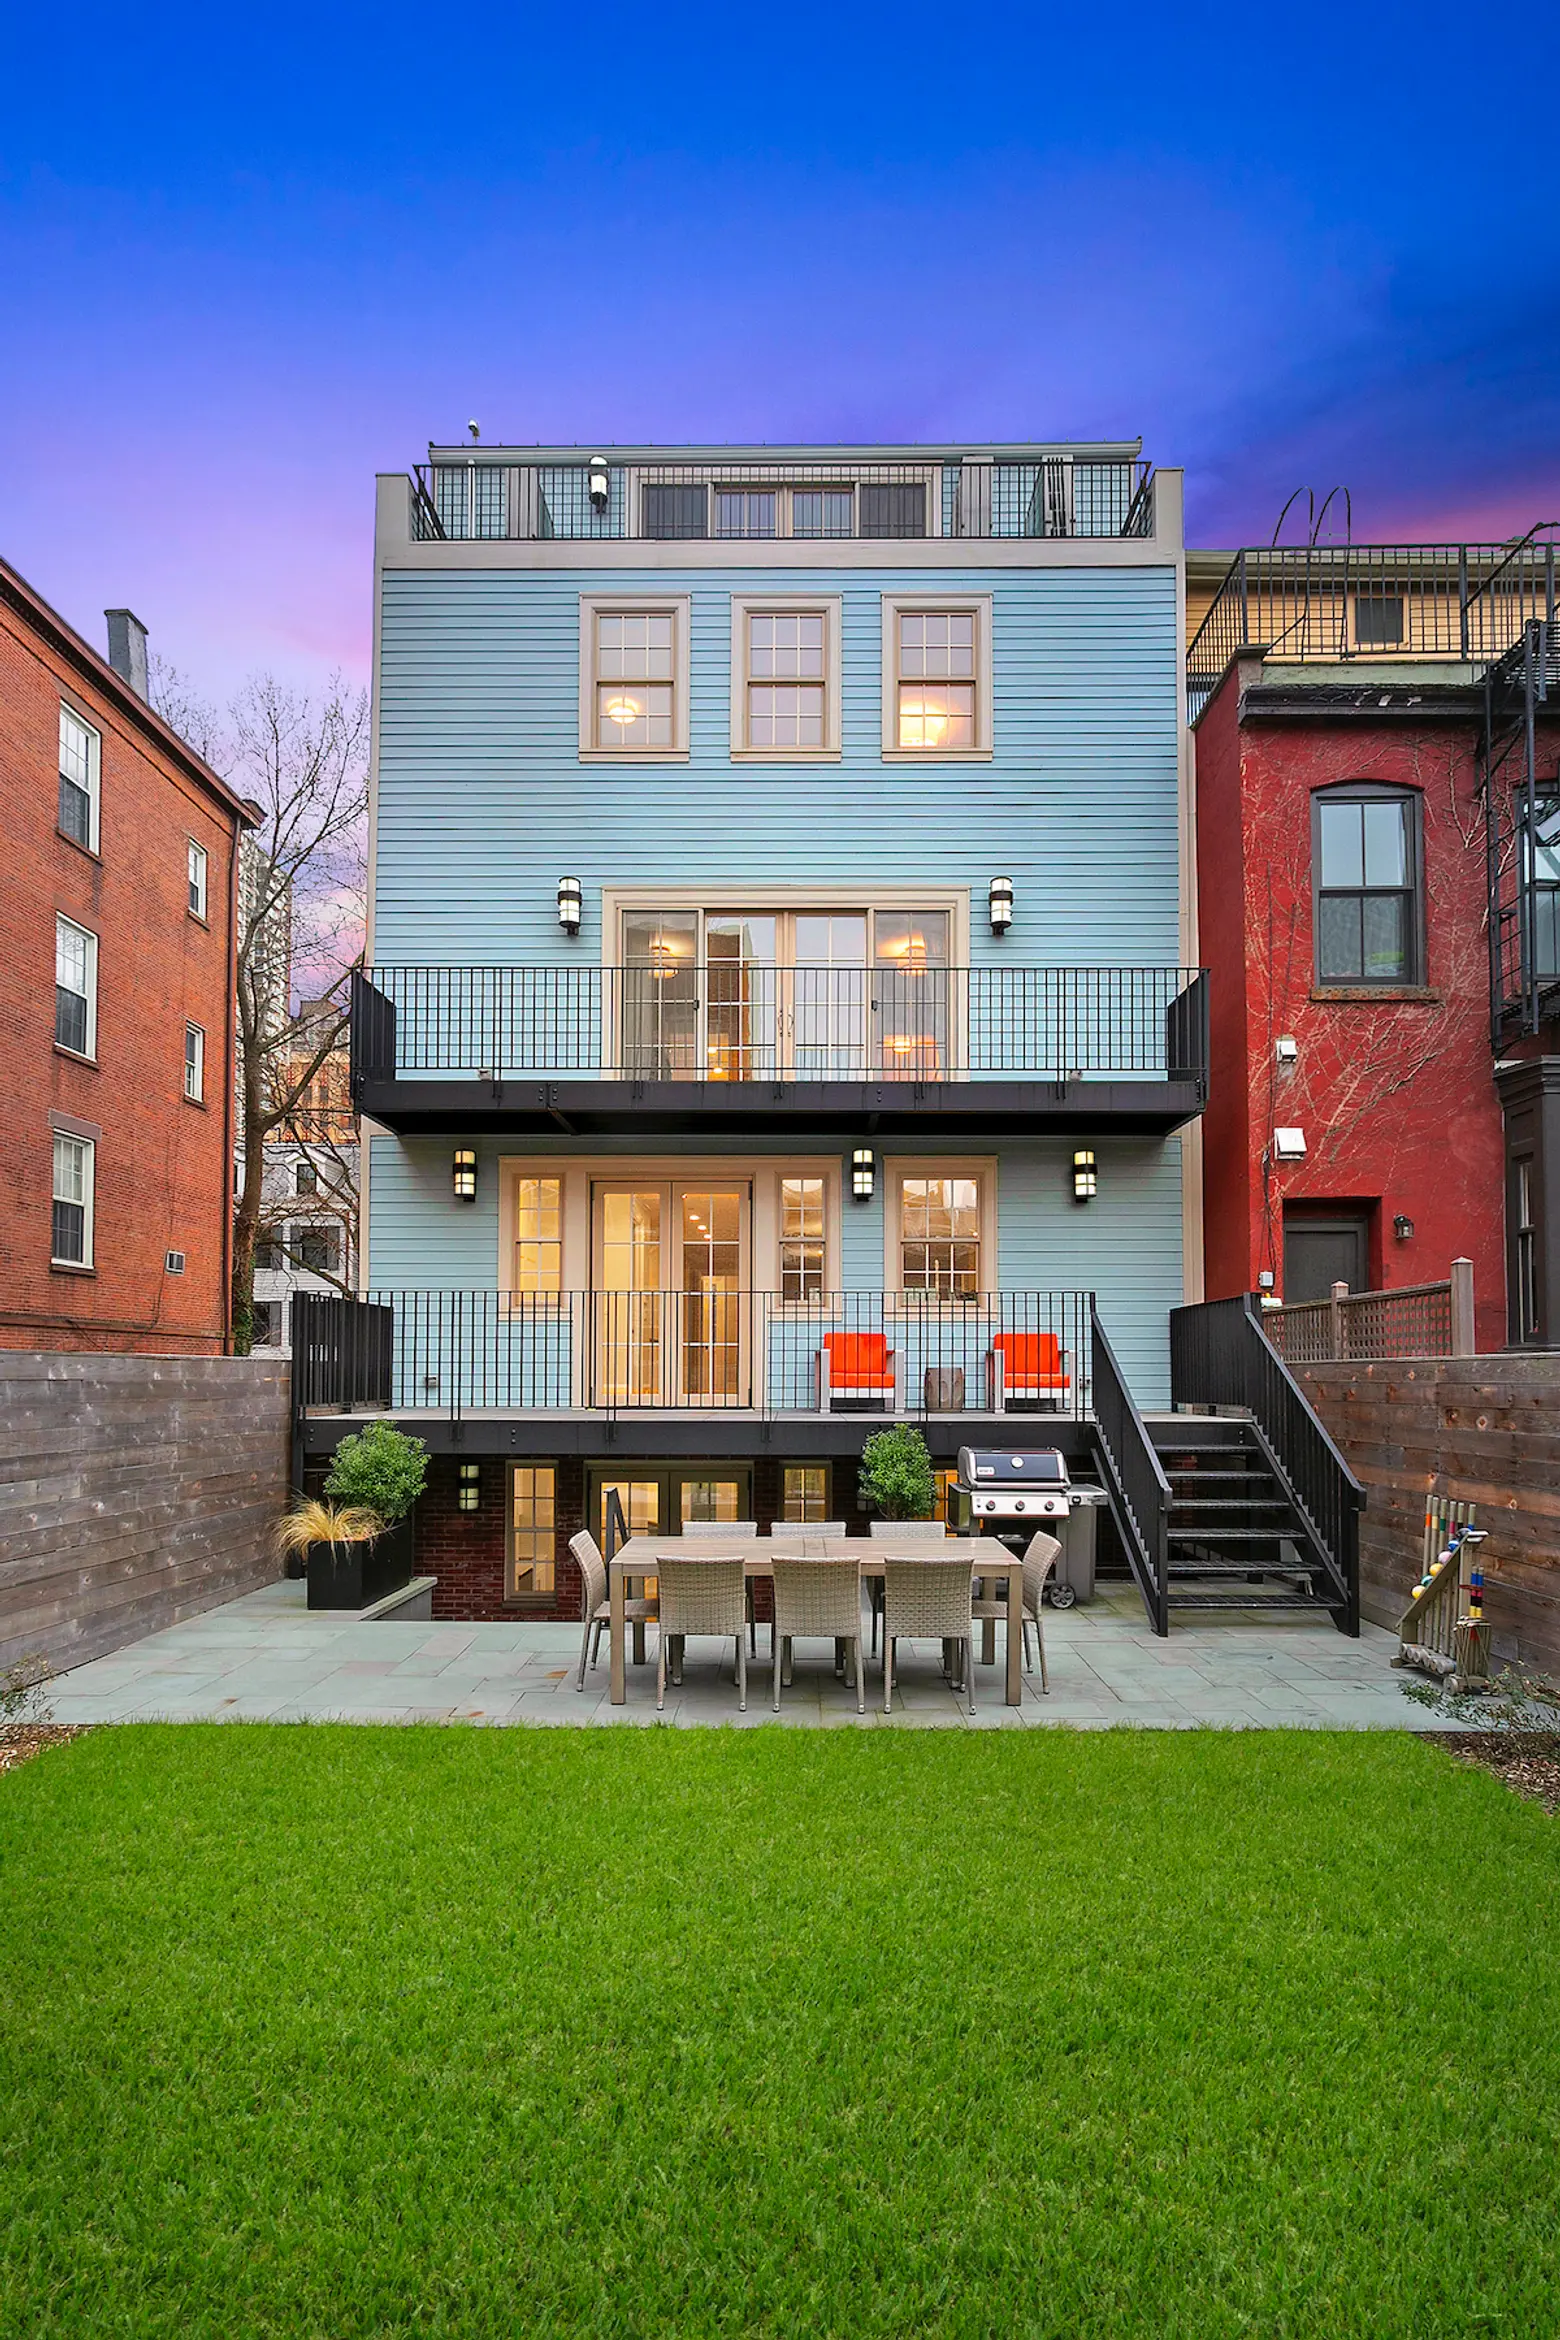 59 Middagh Street, Brooklyn Heights, townhouses, price chops, historic homes, flips